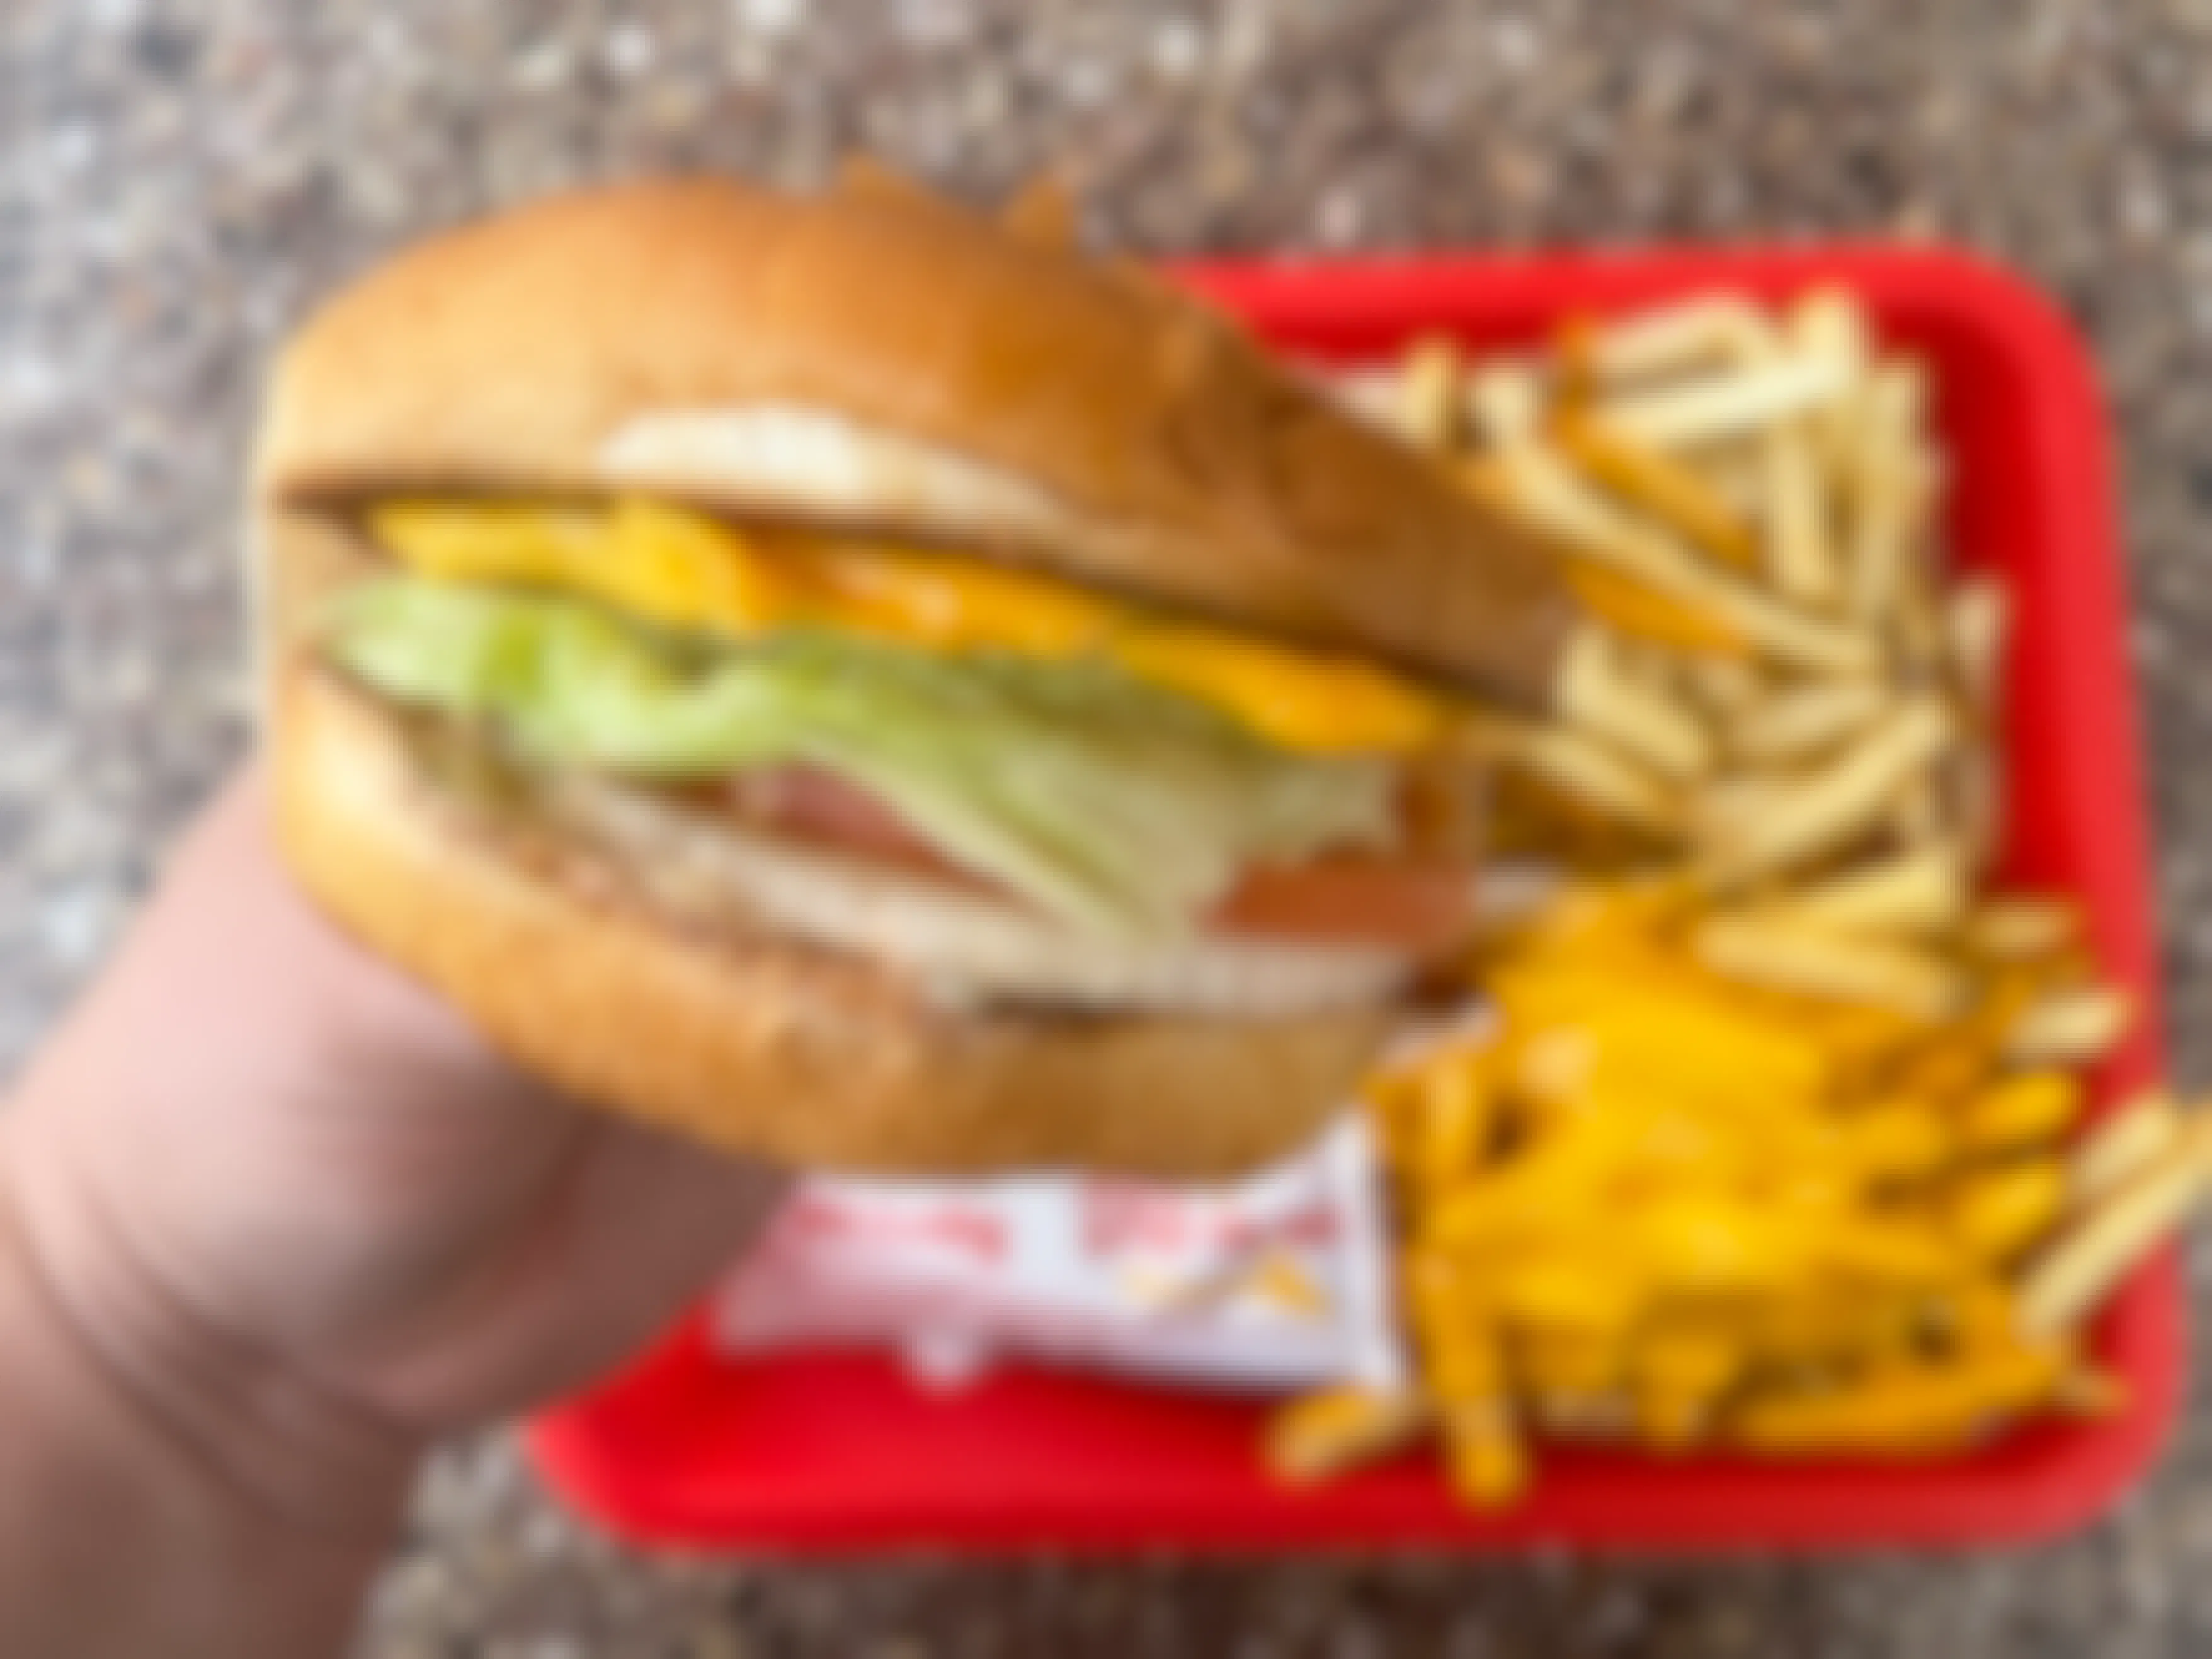 A person holding a grilled cheese with vegetables over a tray of french fries at In-N-Out, part of the in n out secret menu.